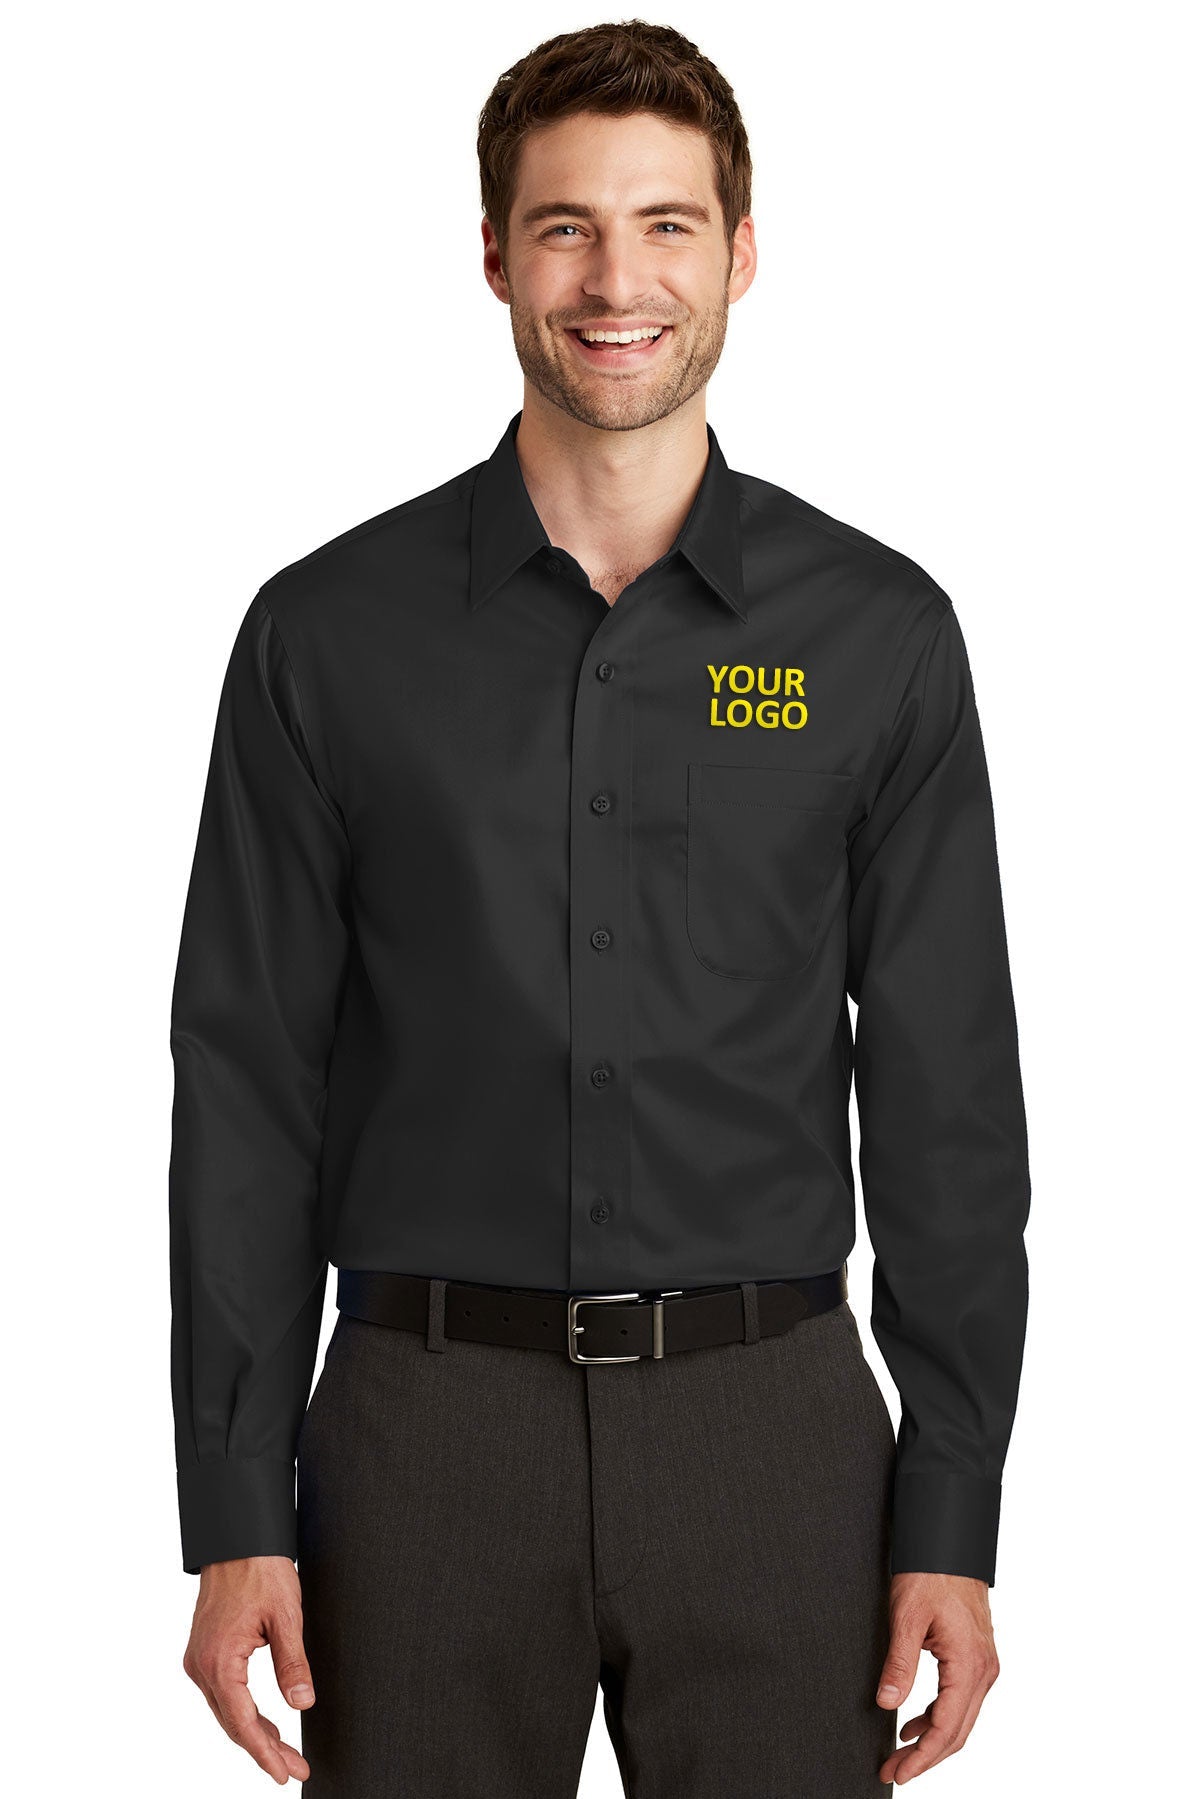 Port Authority Black S638 embroidered work shirts